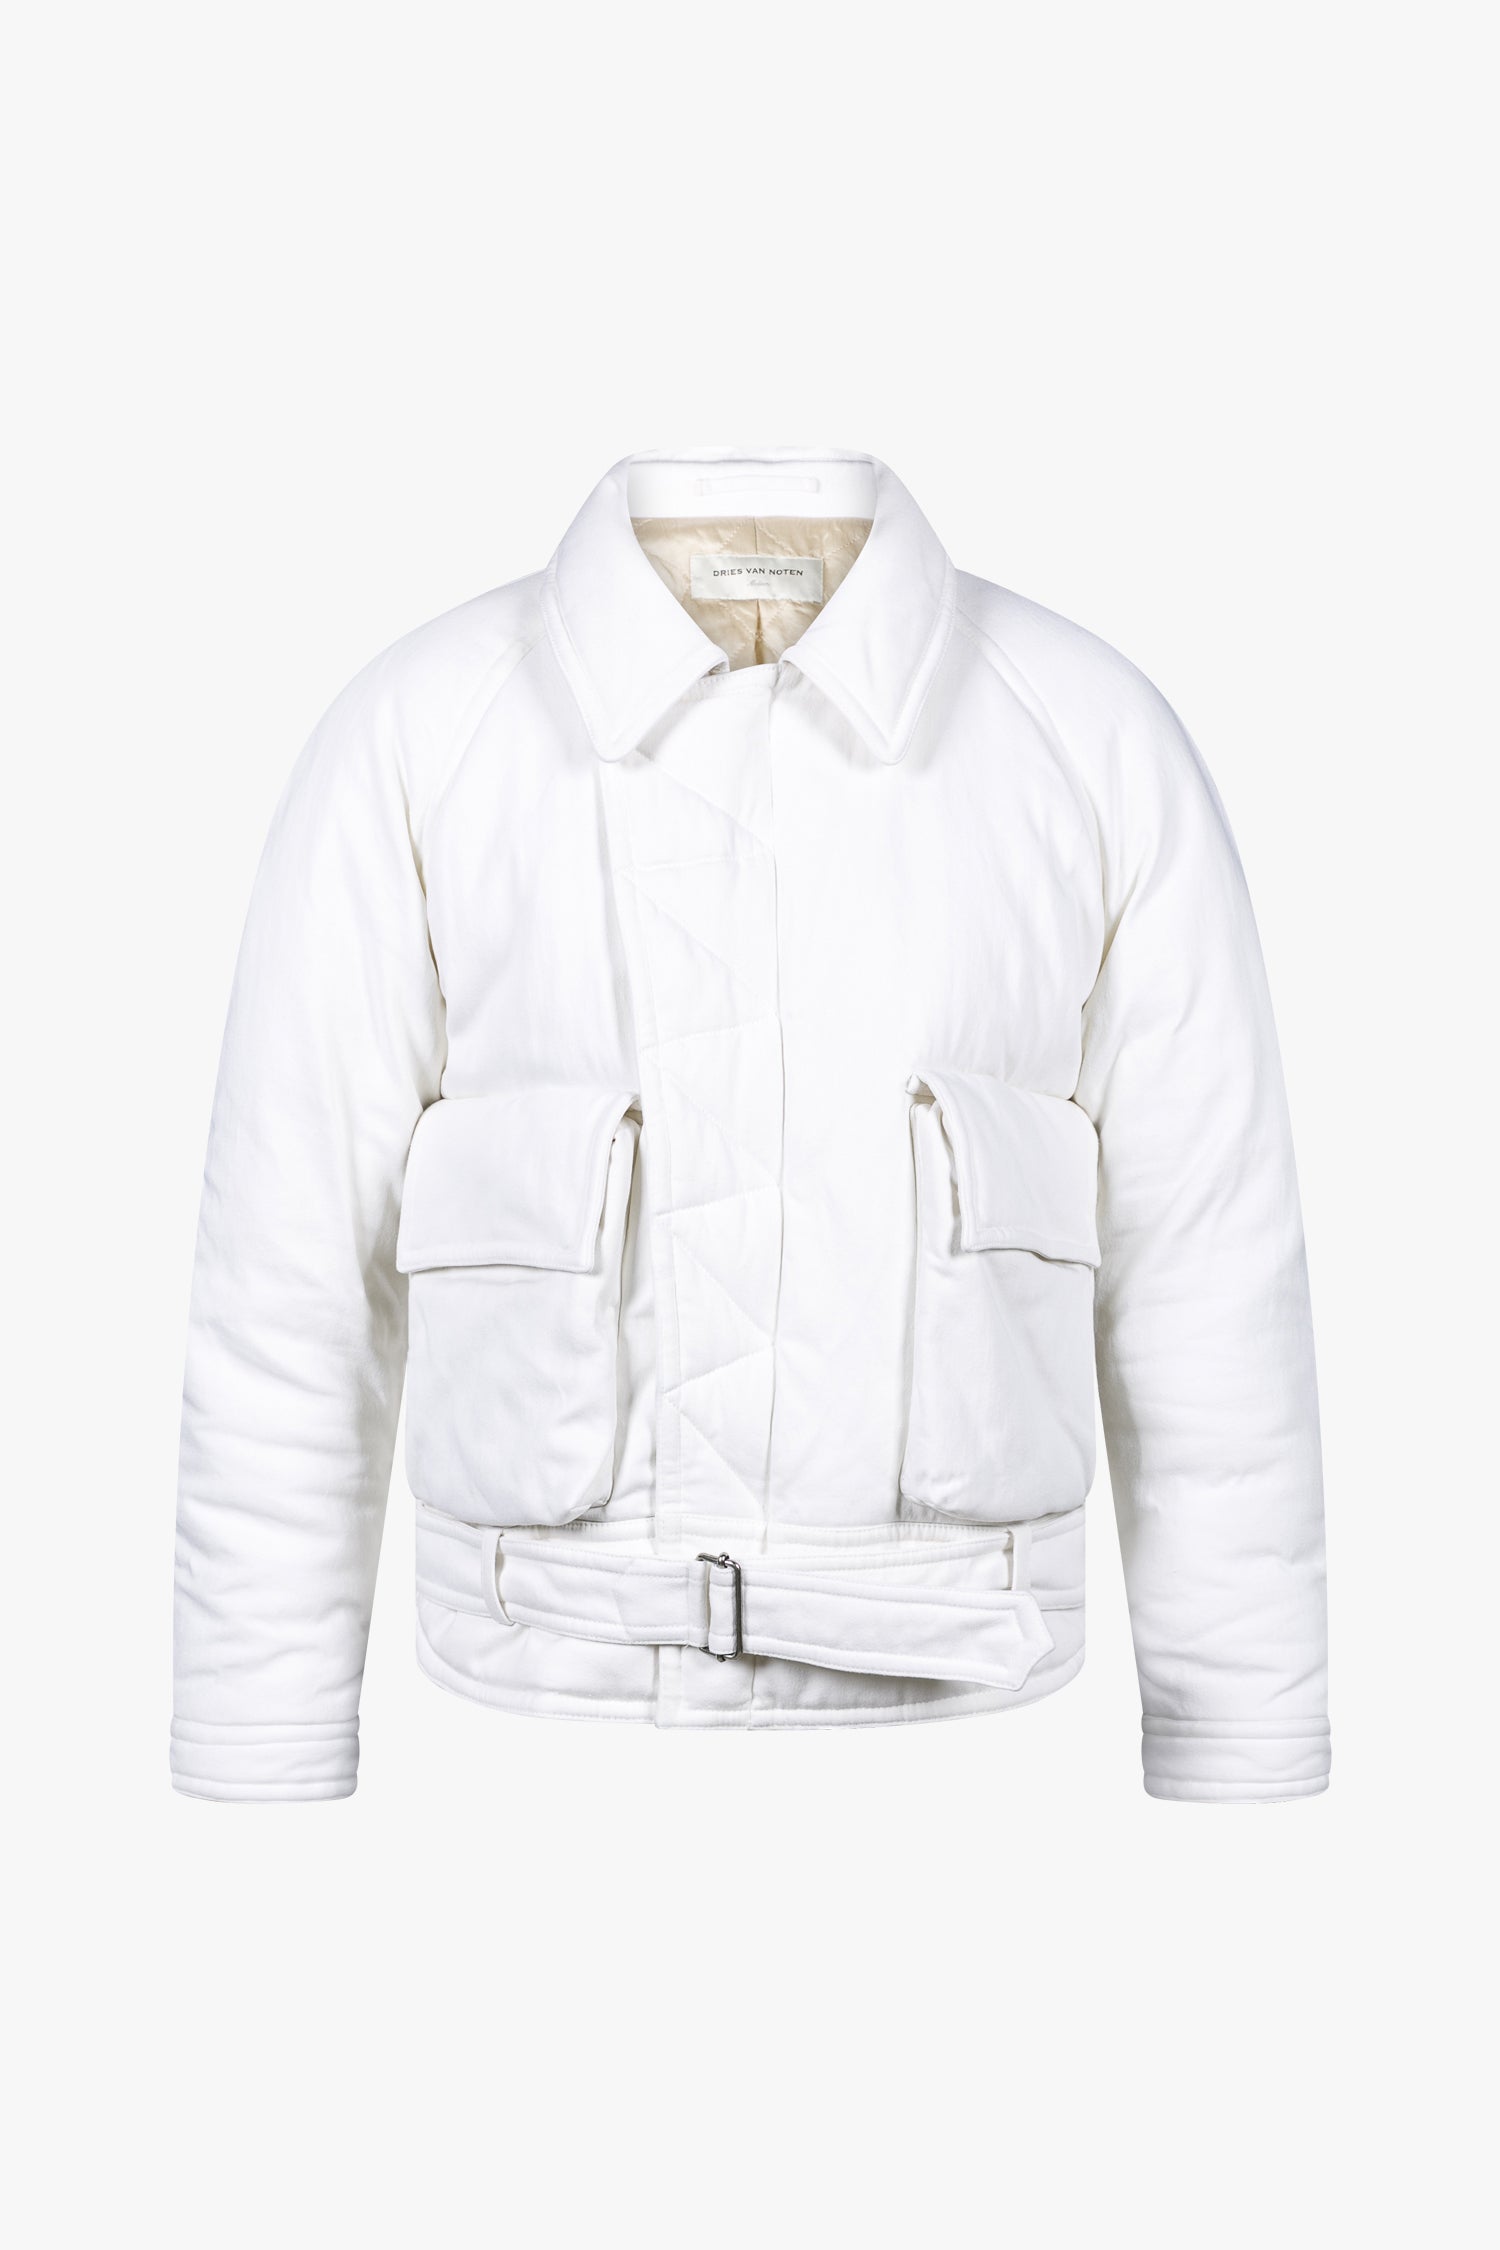 VANNAN JACKET IN OFF WHITE, AW22-23